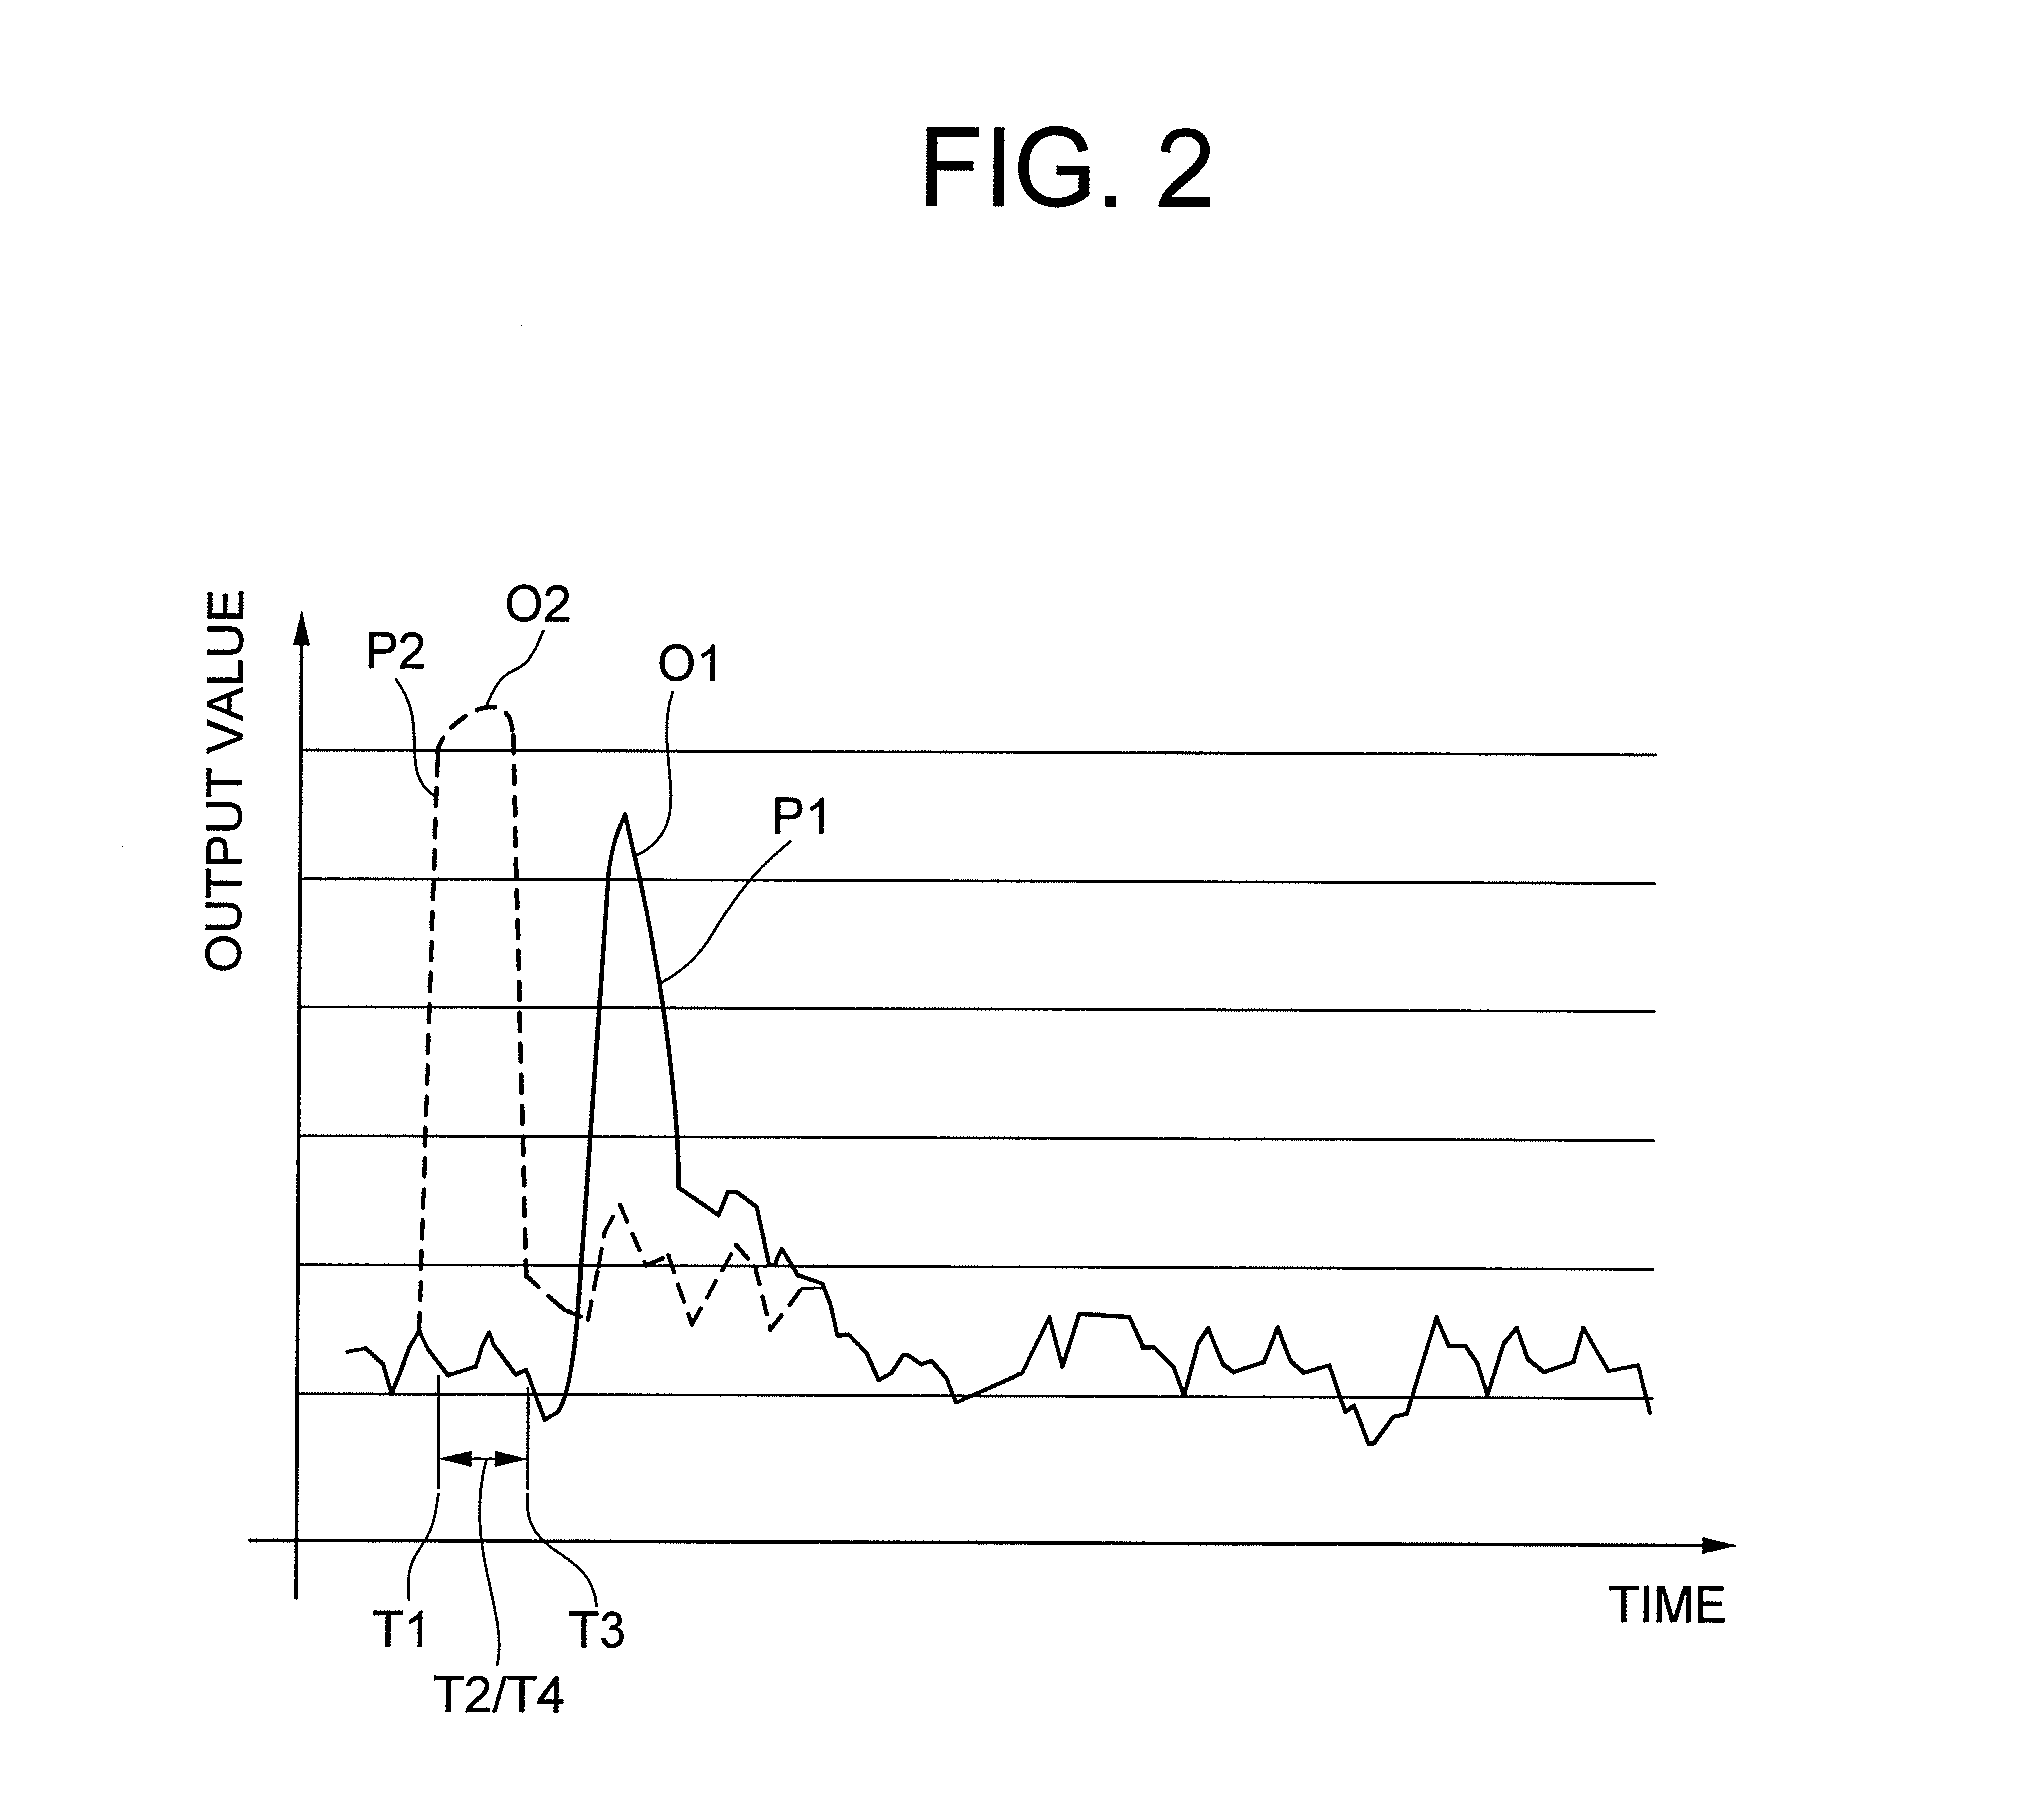 Device, method and program for soldering